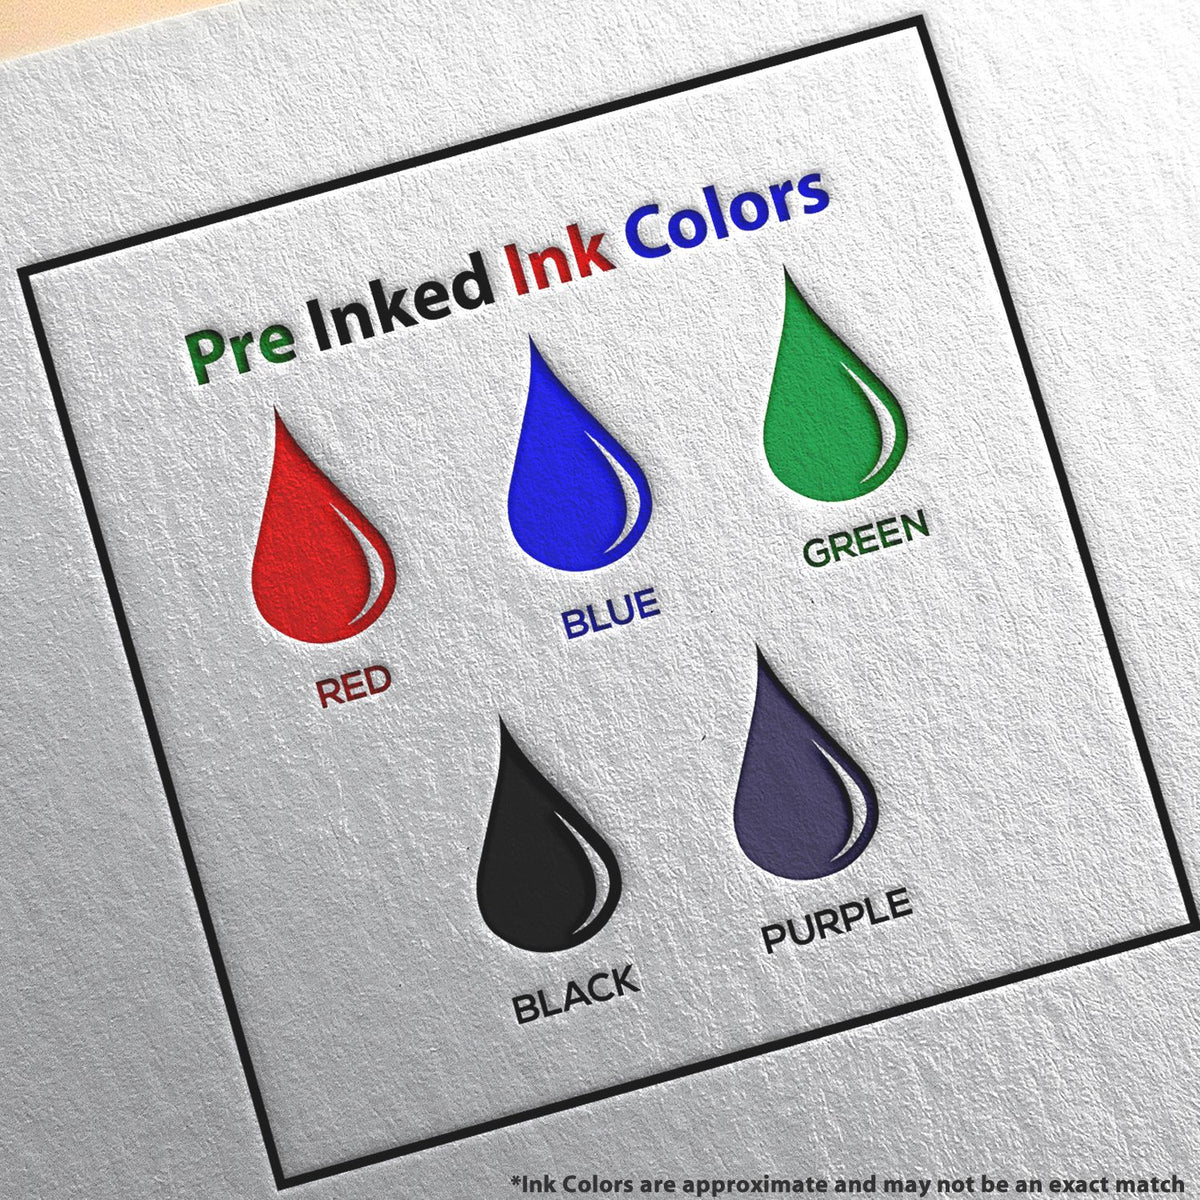 A picture showing the different ink colors or hues available for the PSI Washington Notary Stamp product.